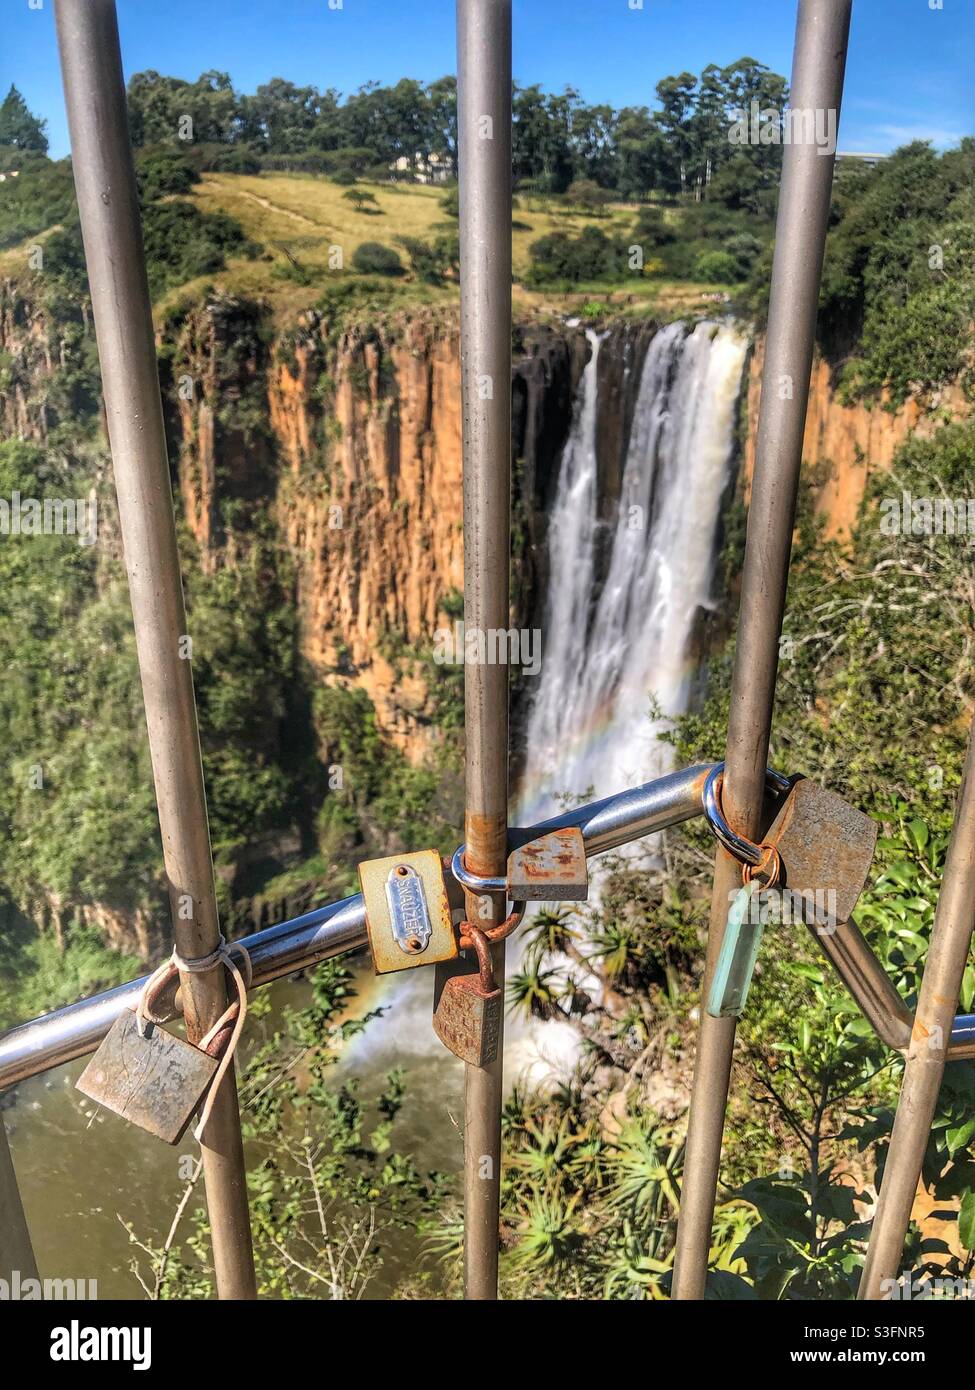 Howick Falls in the background behind the railing with the locks attached Stock Photo